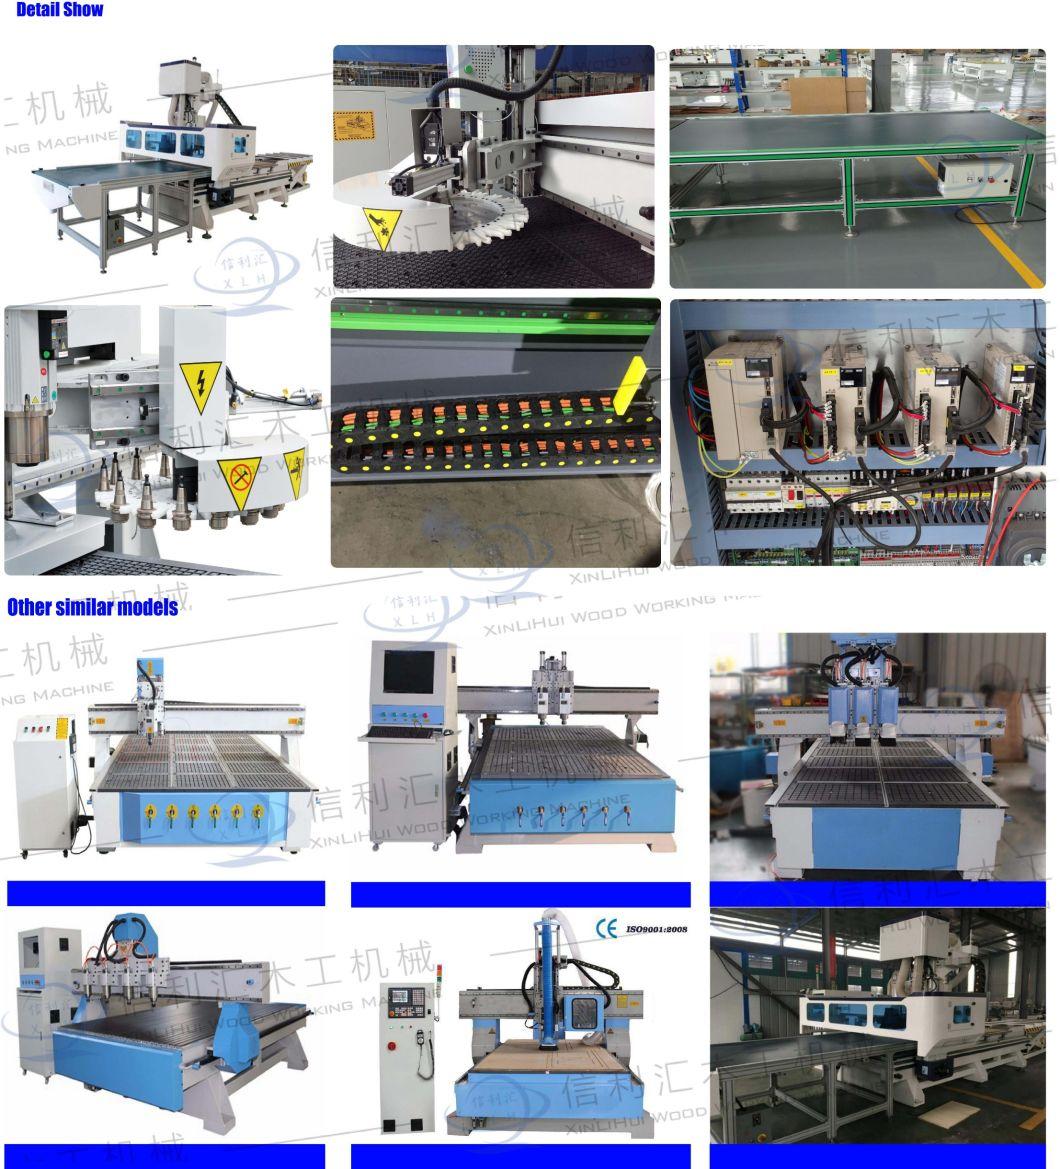 Wood Lathe, Wooden Craft, CNC Router, Smal Wood CNC Router, Medium Size Wood CNC Router 4 Head Router for Our Hinge Doors. CNC Machining Centre with 6 Axes